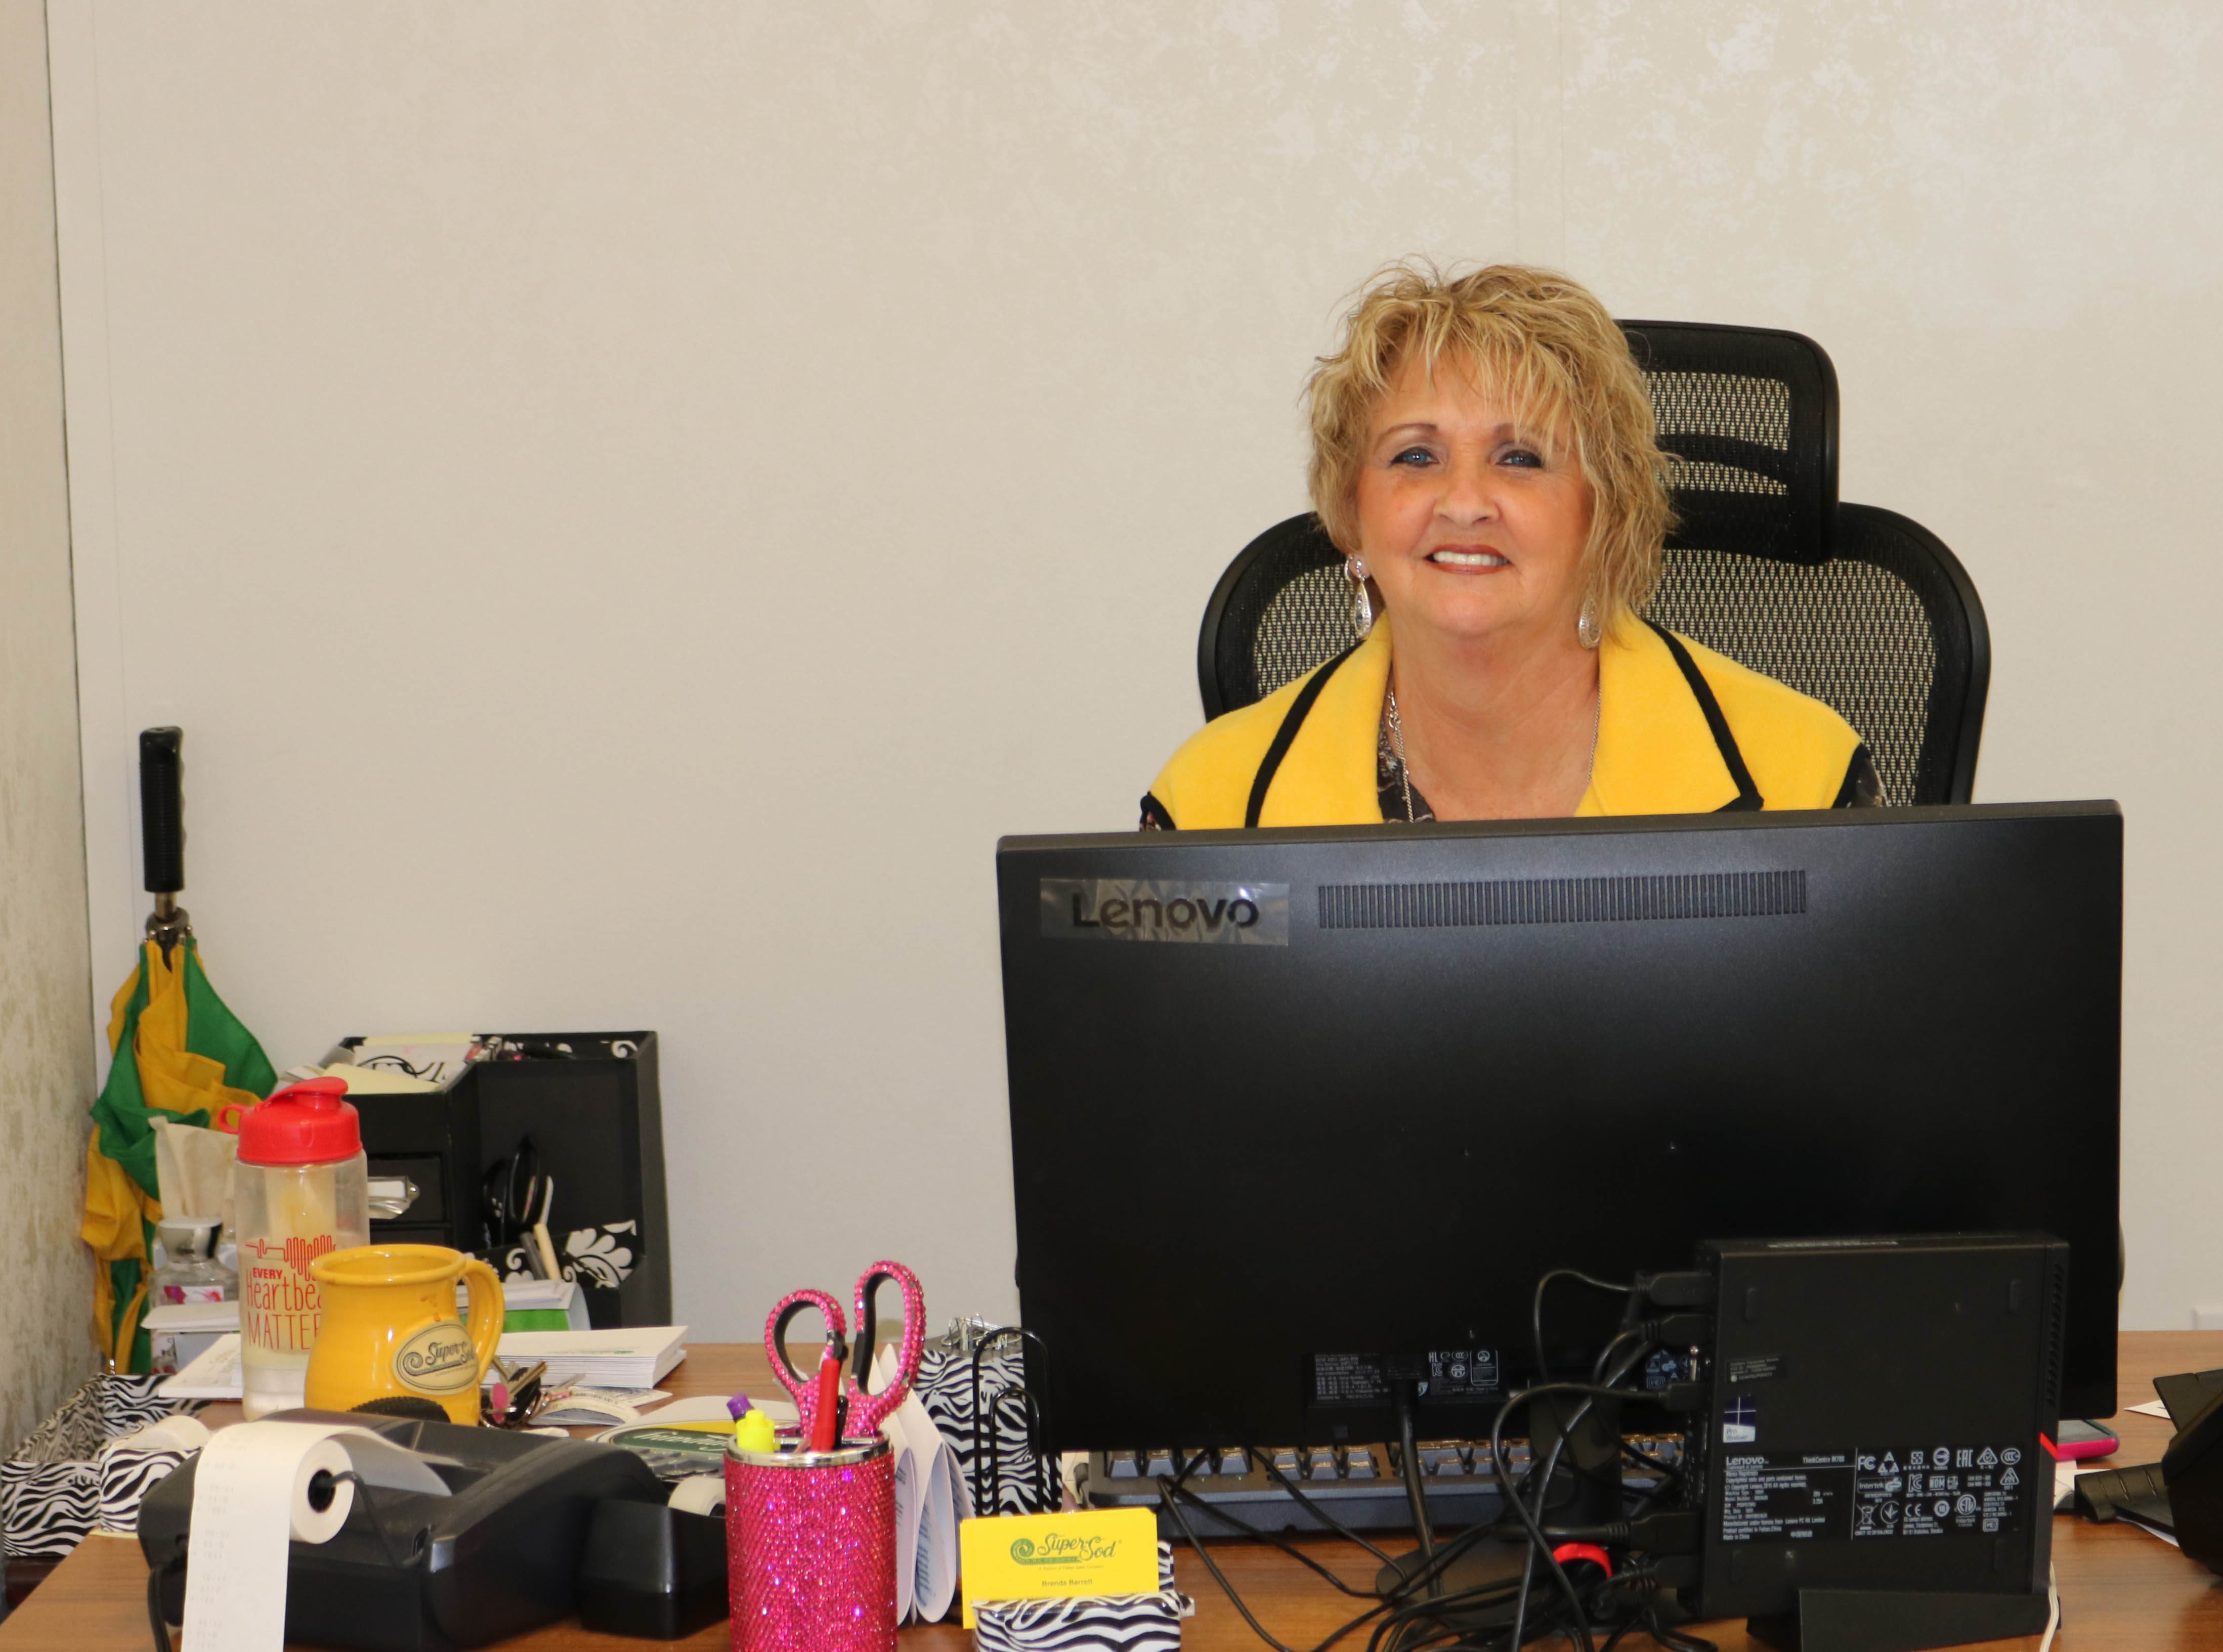 Brenda Barrett serves as the new seed sales and delivery associate for Patten Seed Company